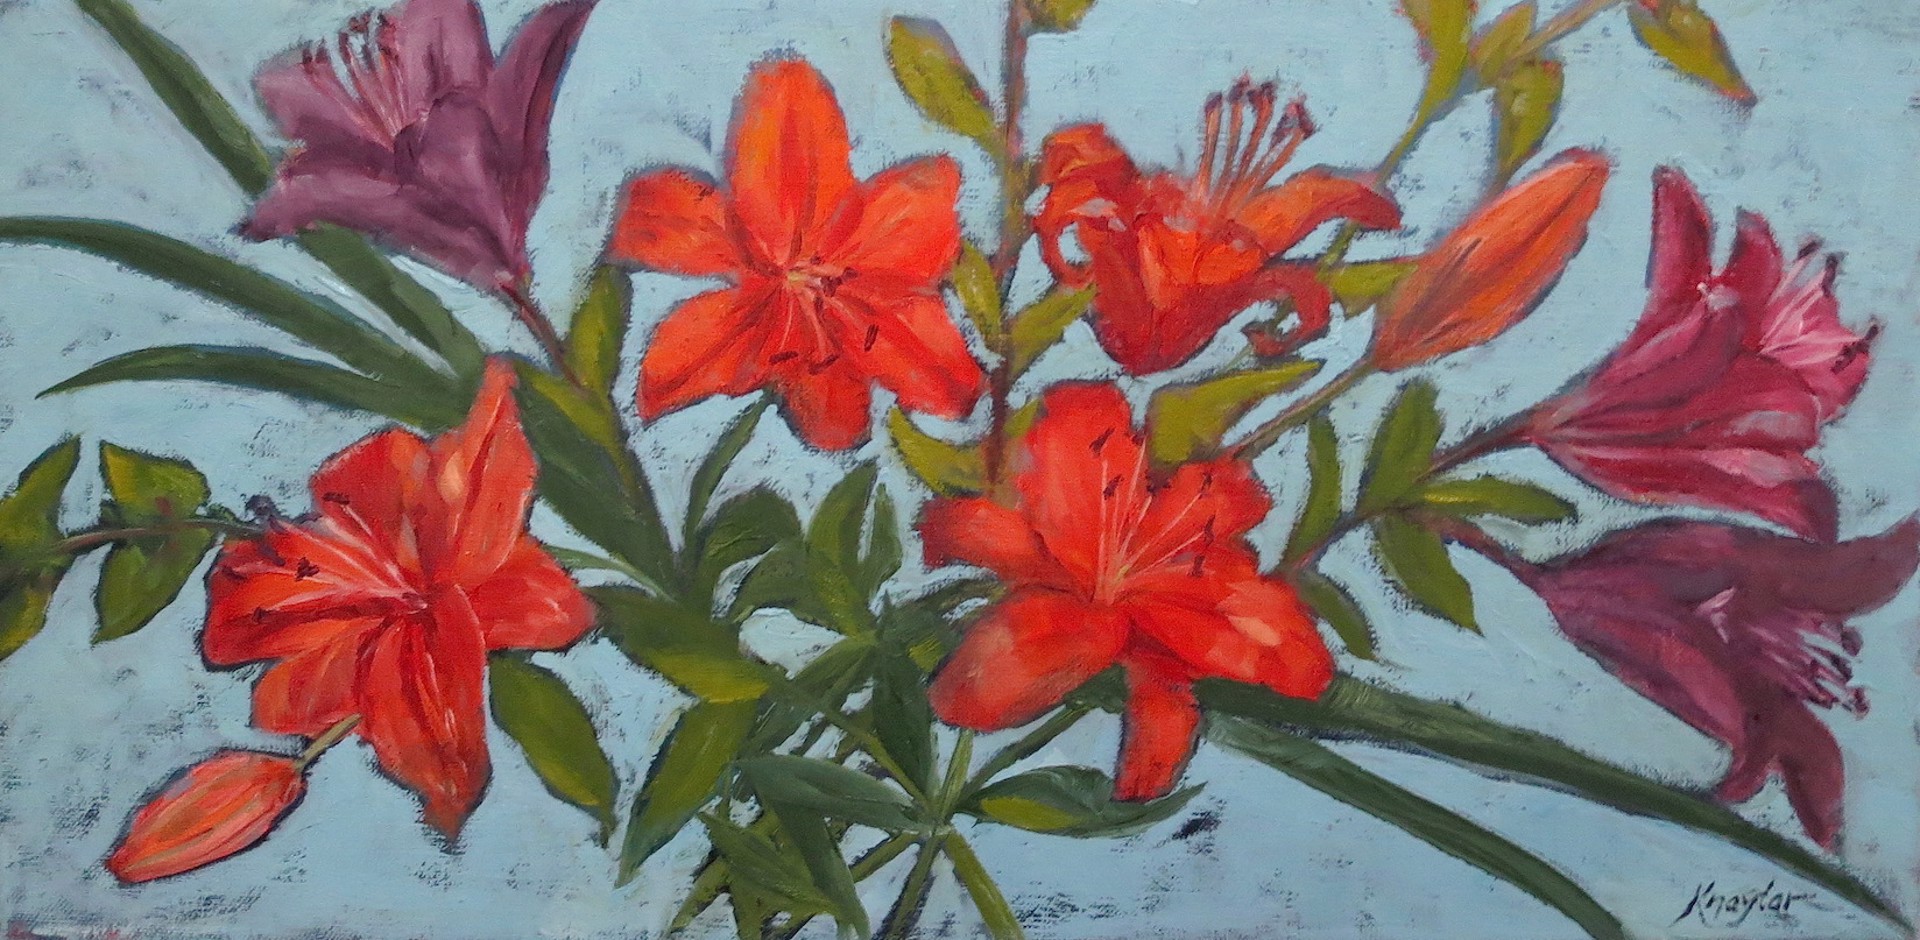 Asiatic Lilies by Karin Naylor